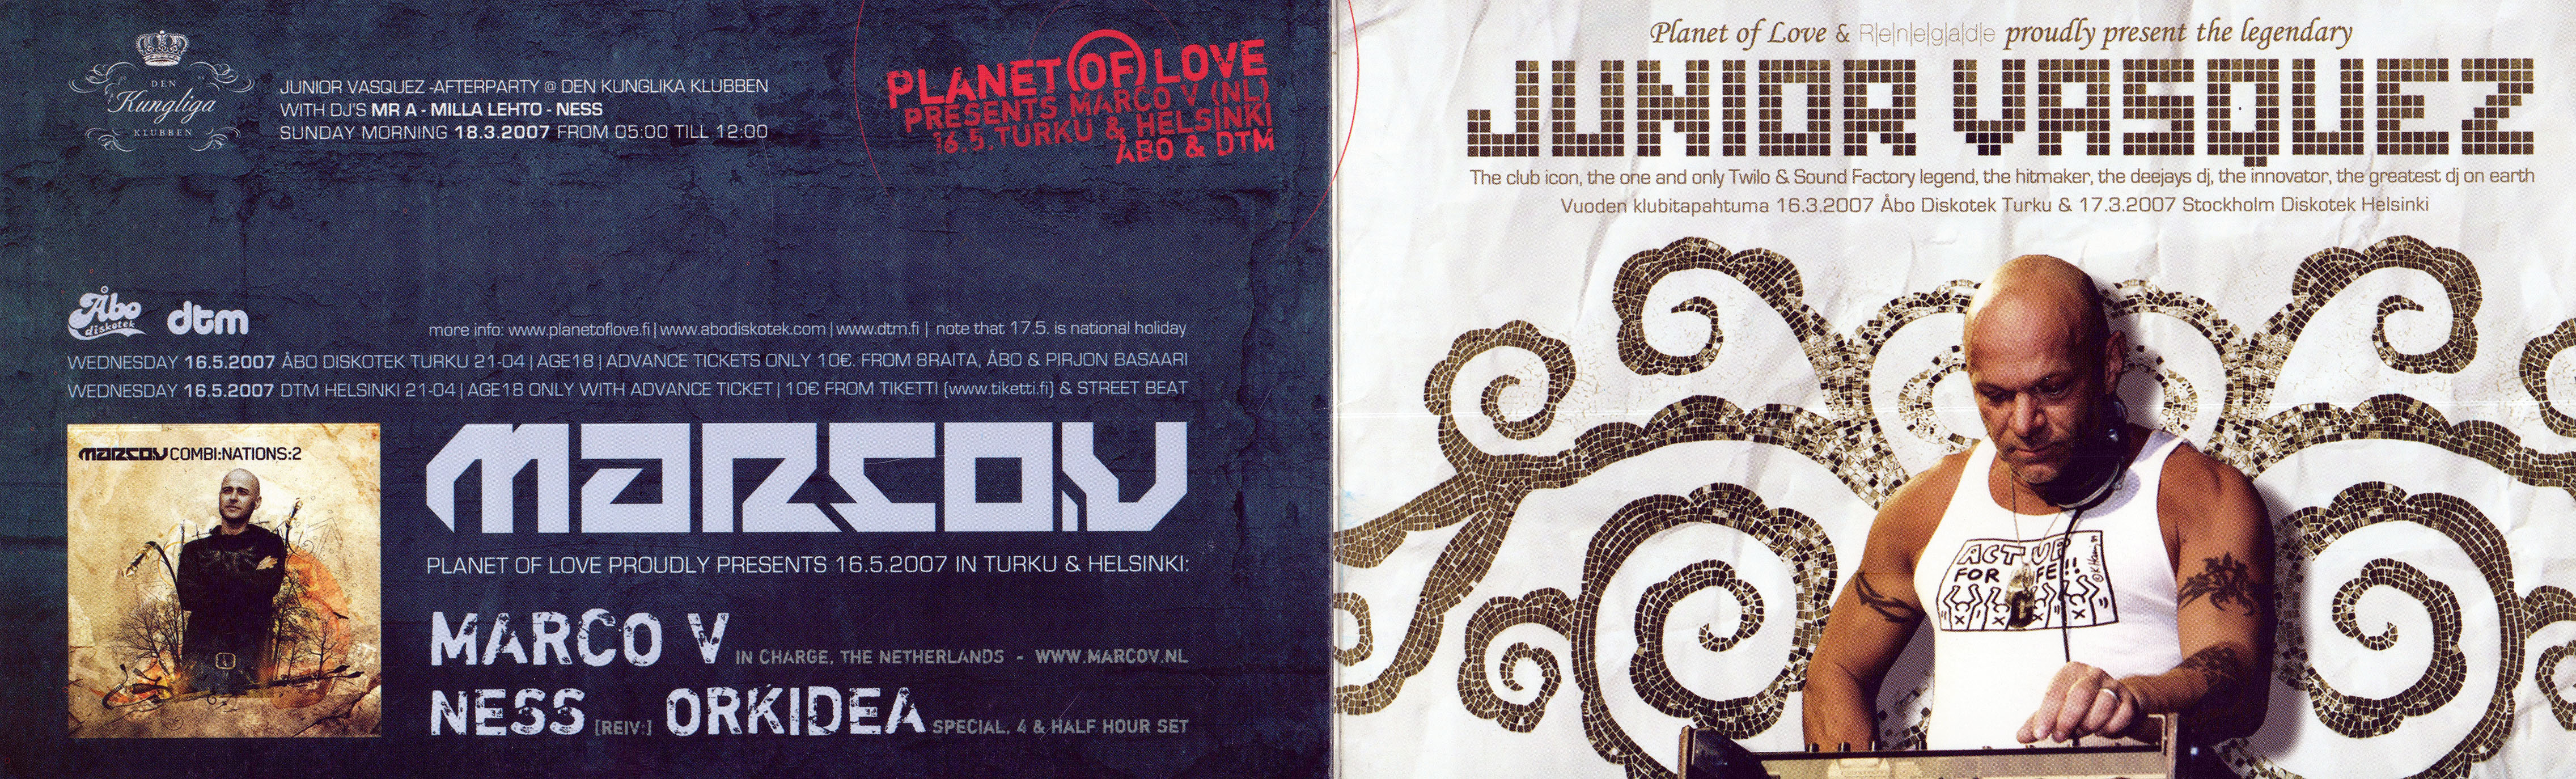 Flyers from the past